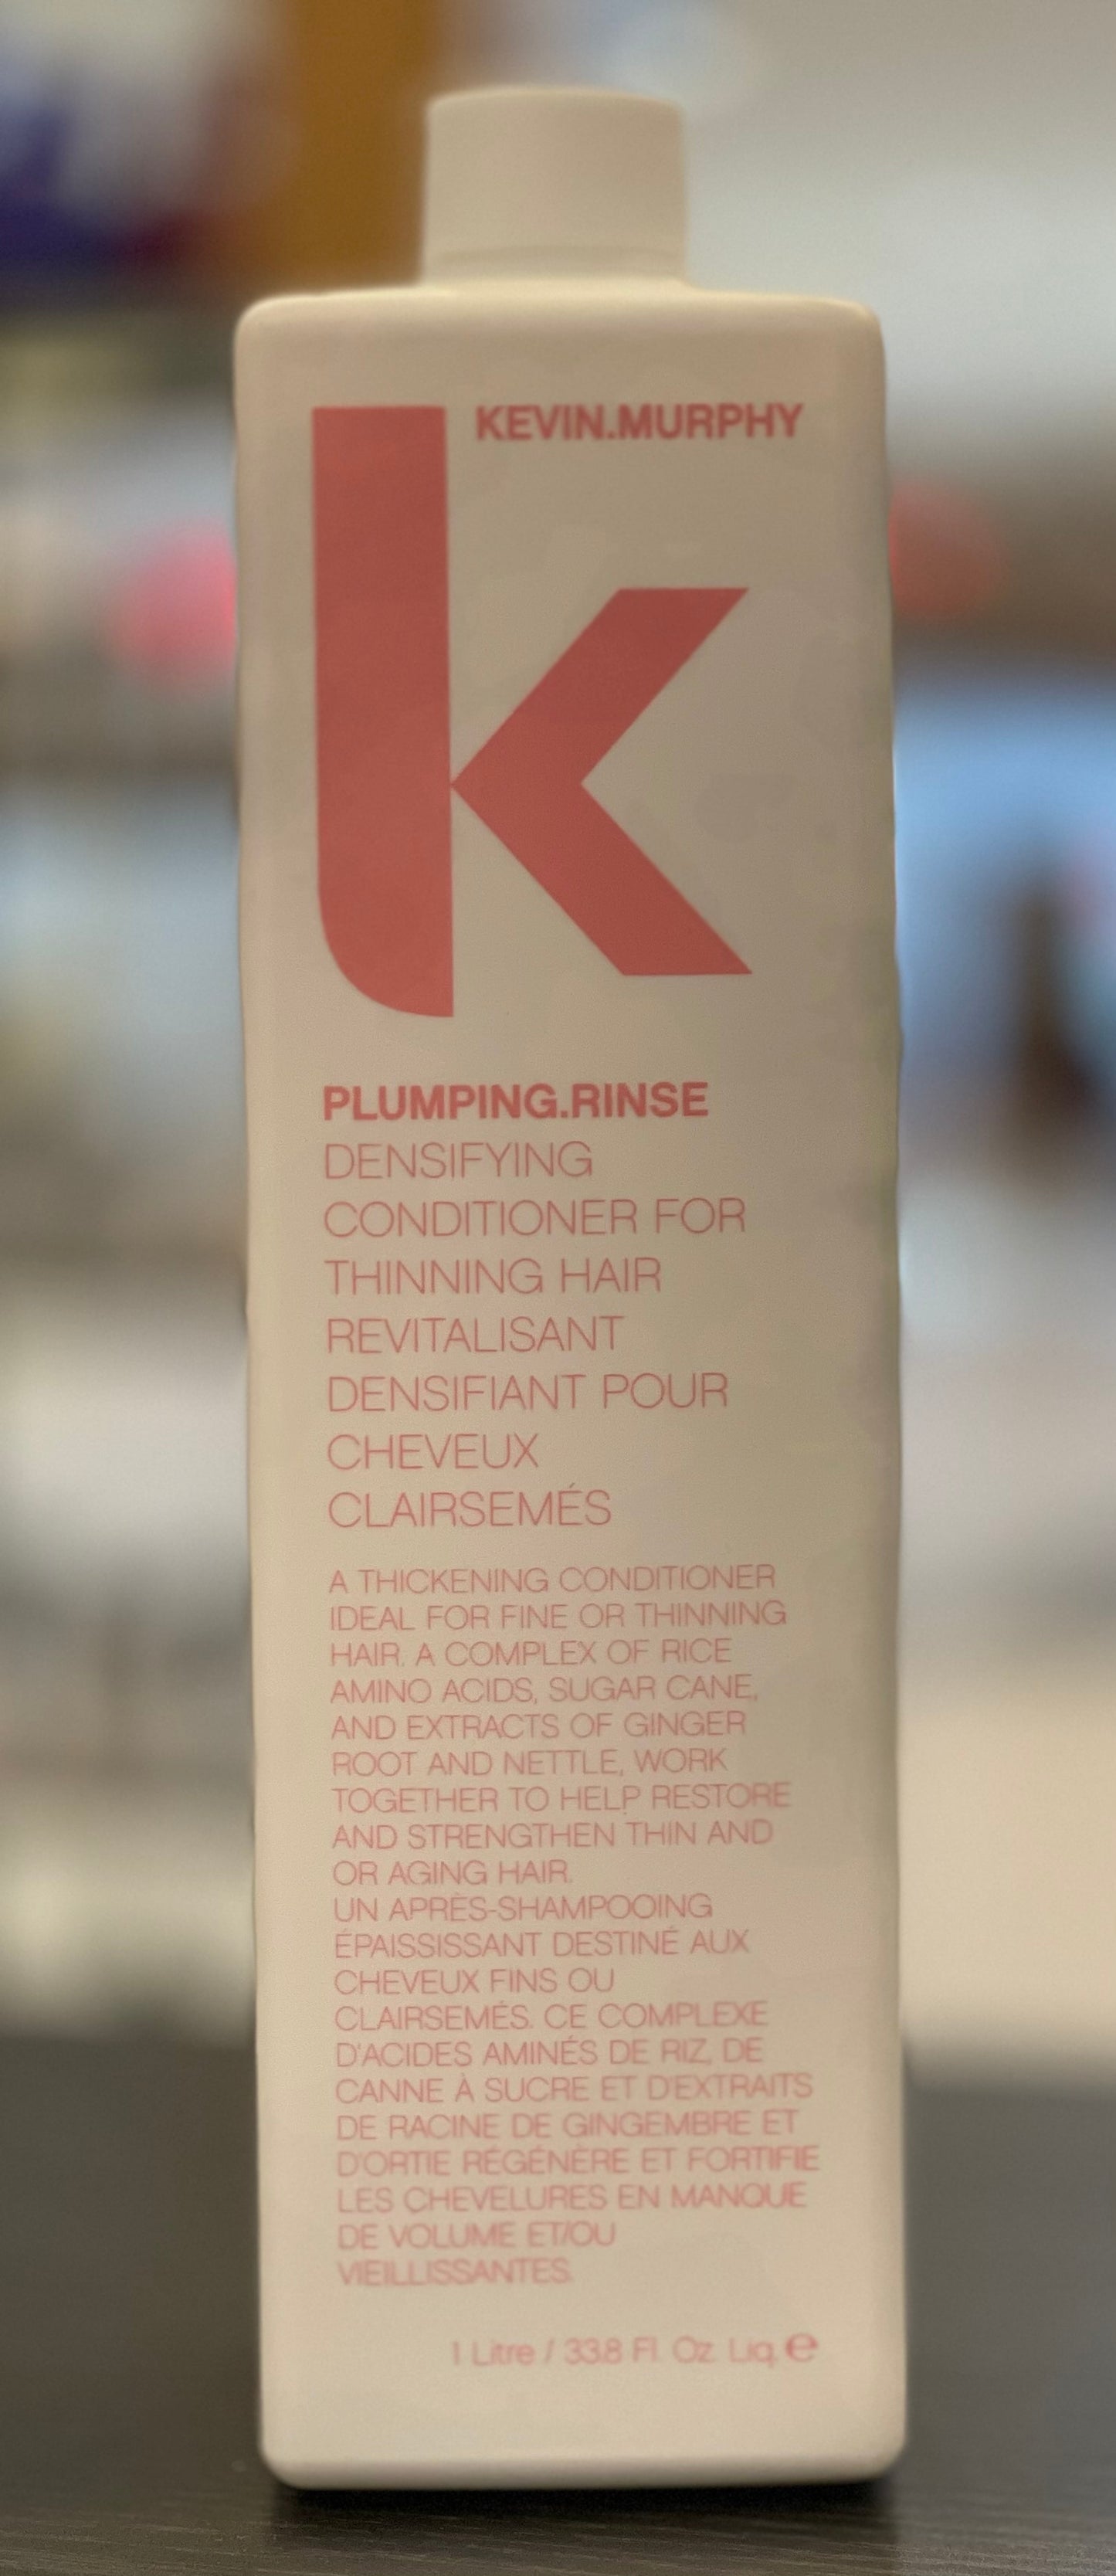 Kevin.Murphy - Plumping.Rinse conditioner 33.8 fl. oz. / 1 L